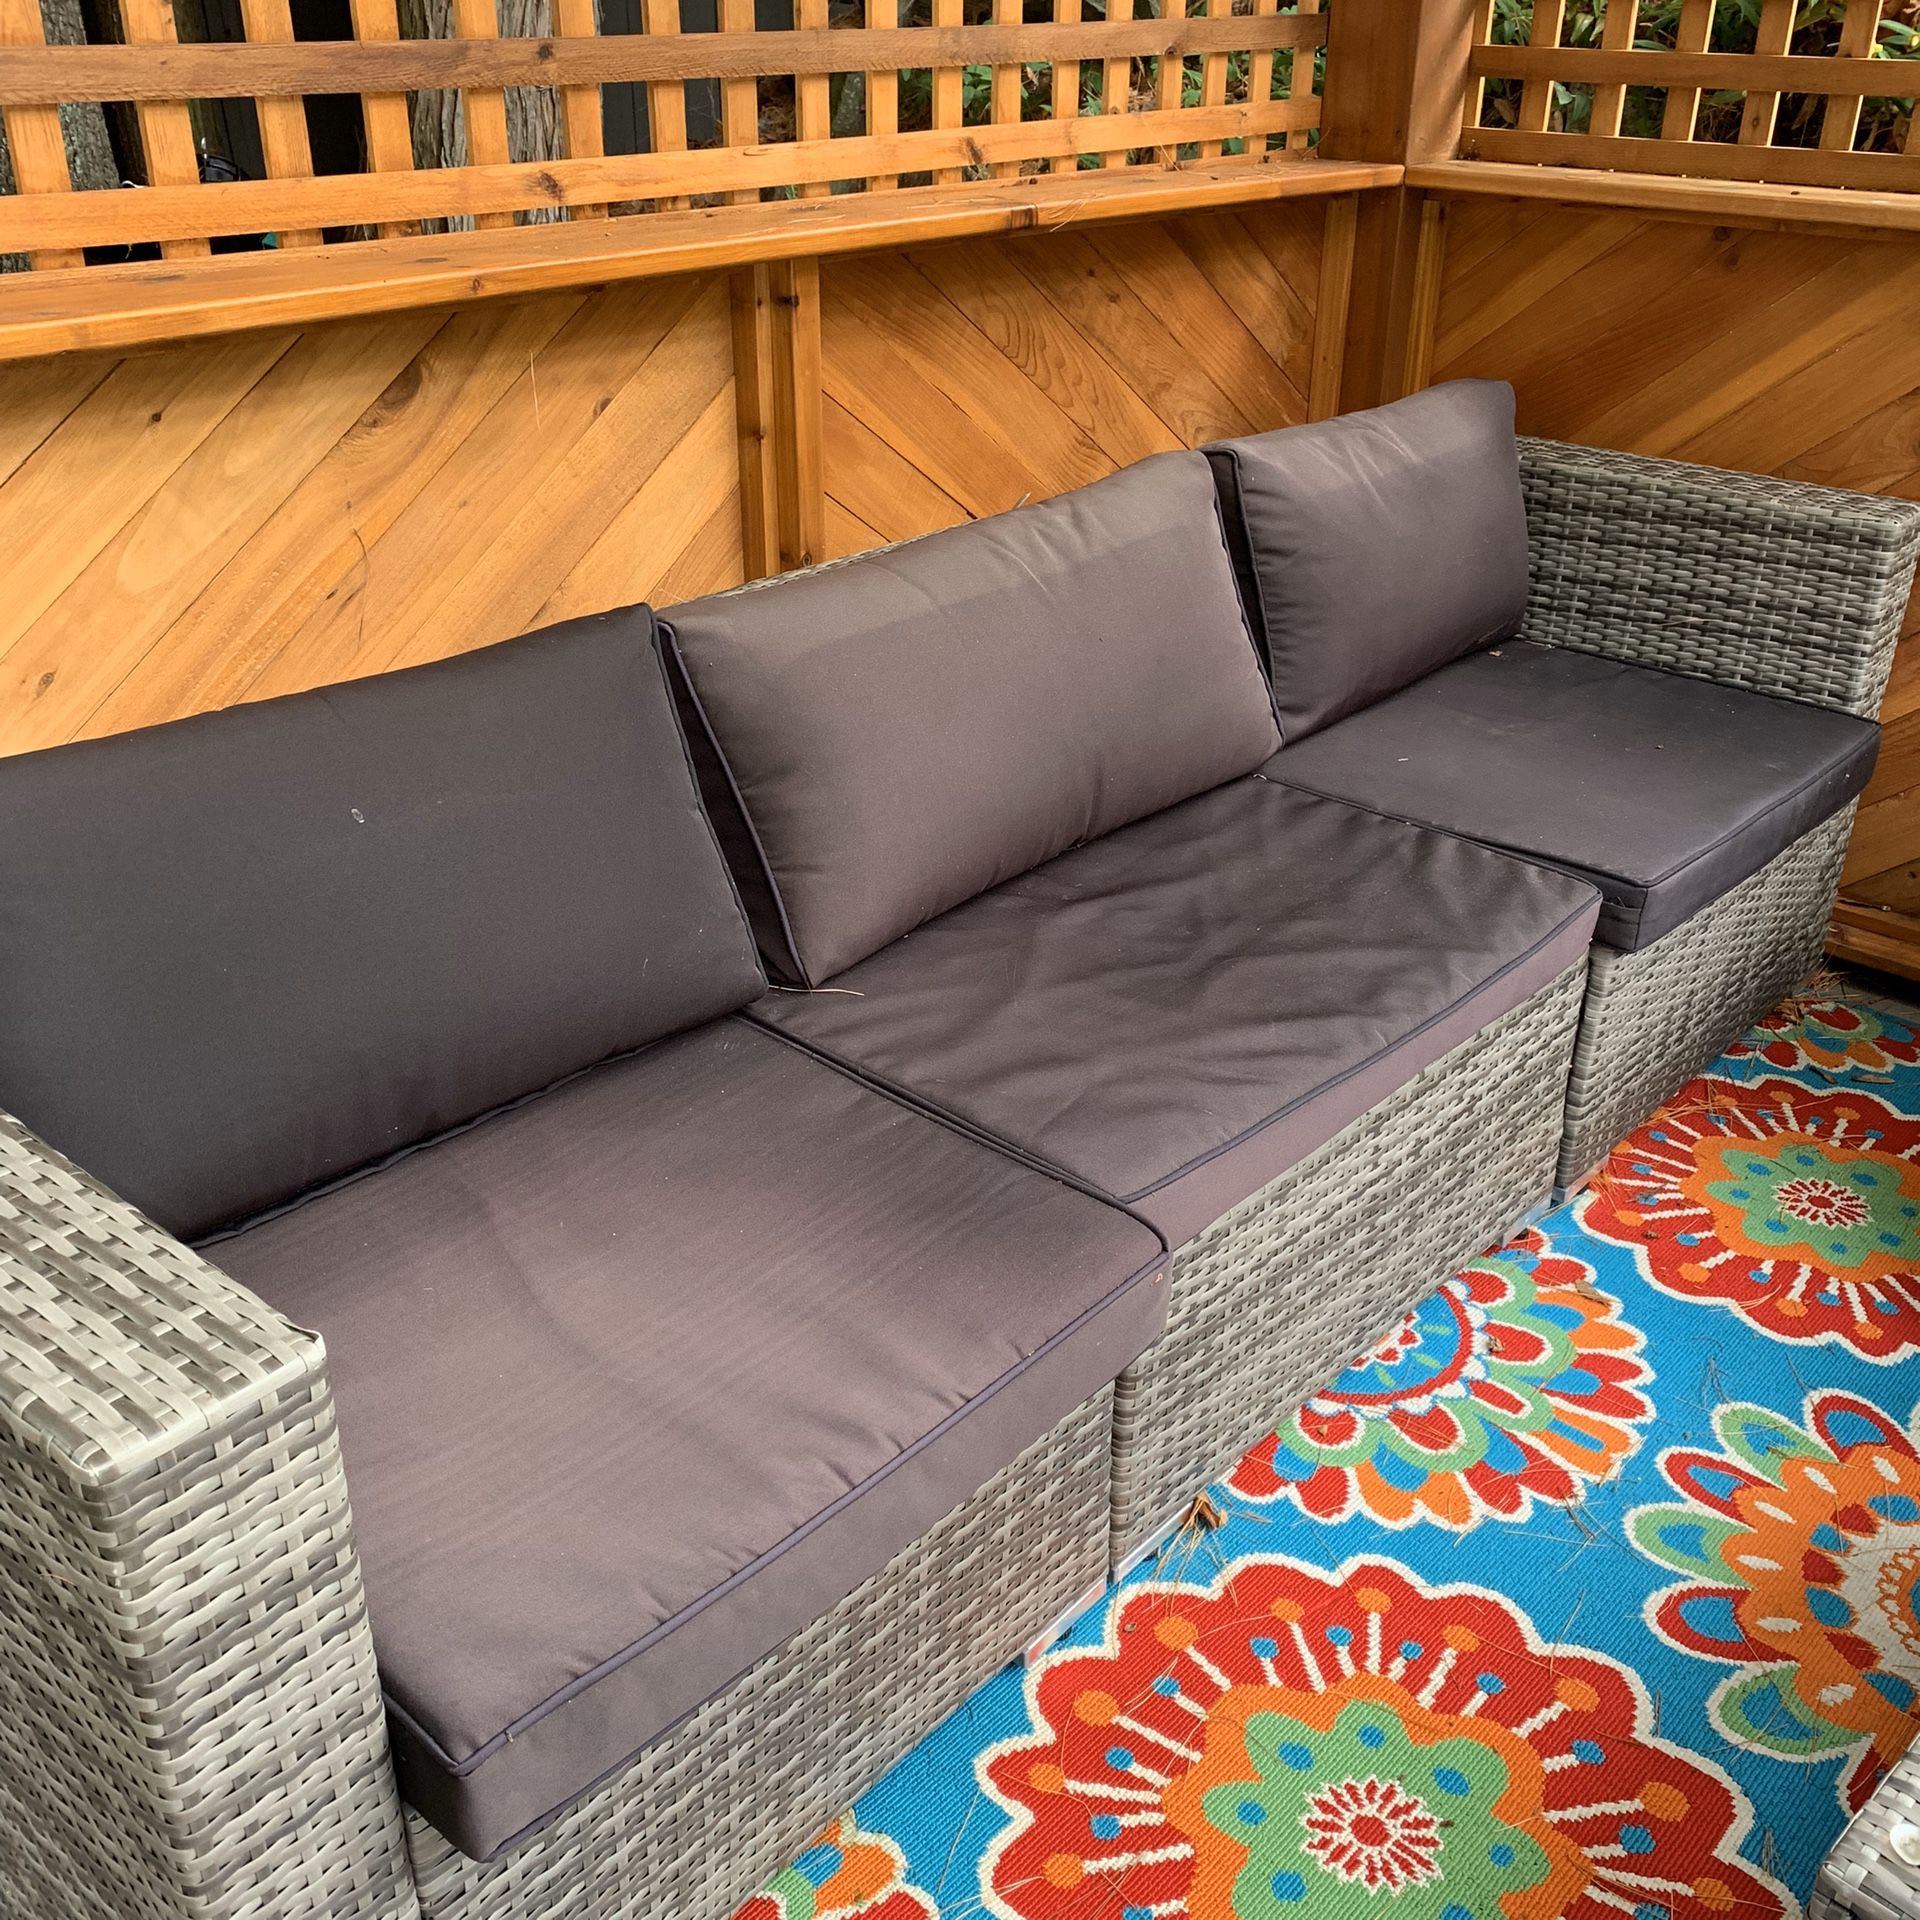 Patio furniture set! Couch, Chair, Table